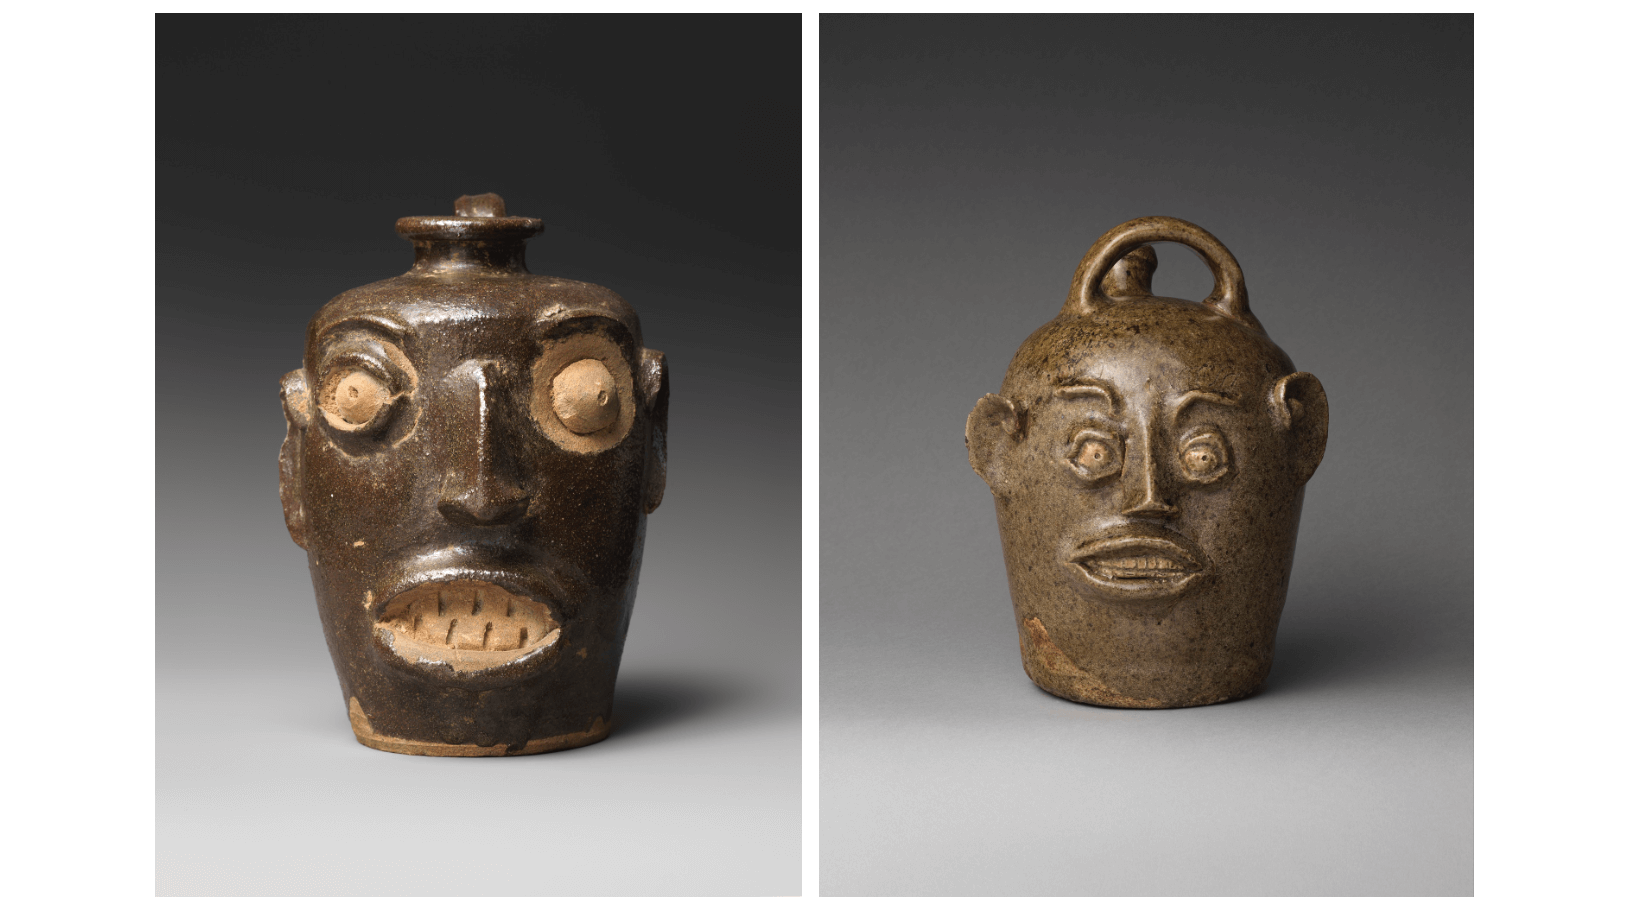 Image of a face vessel on the left and a face jug on the right